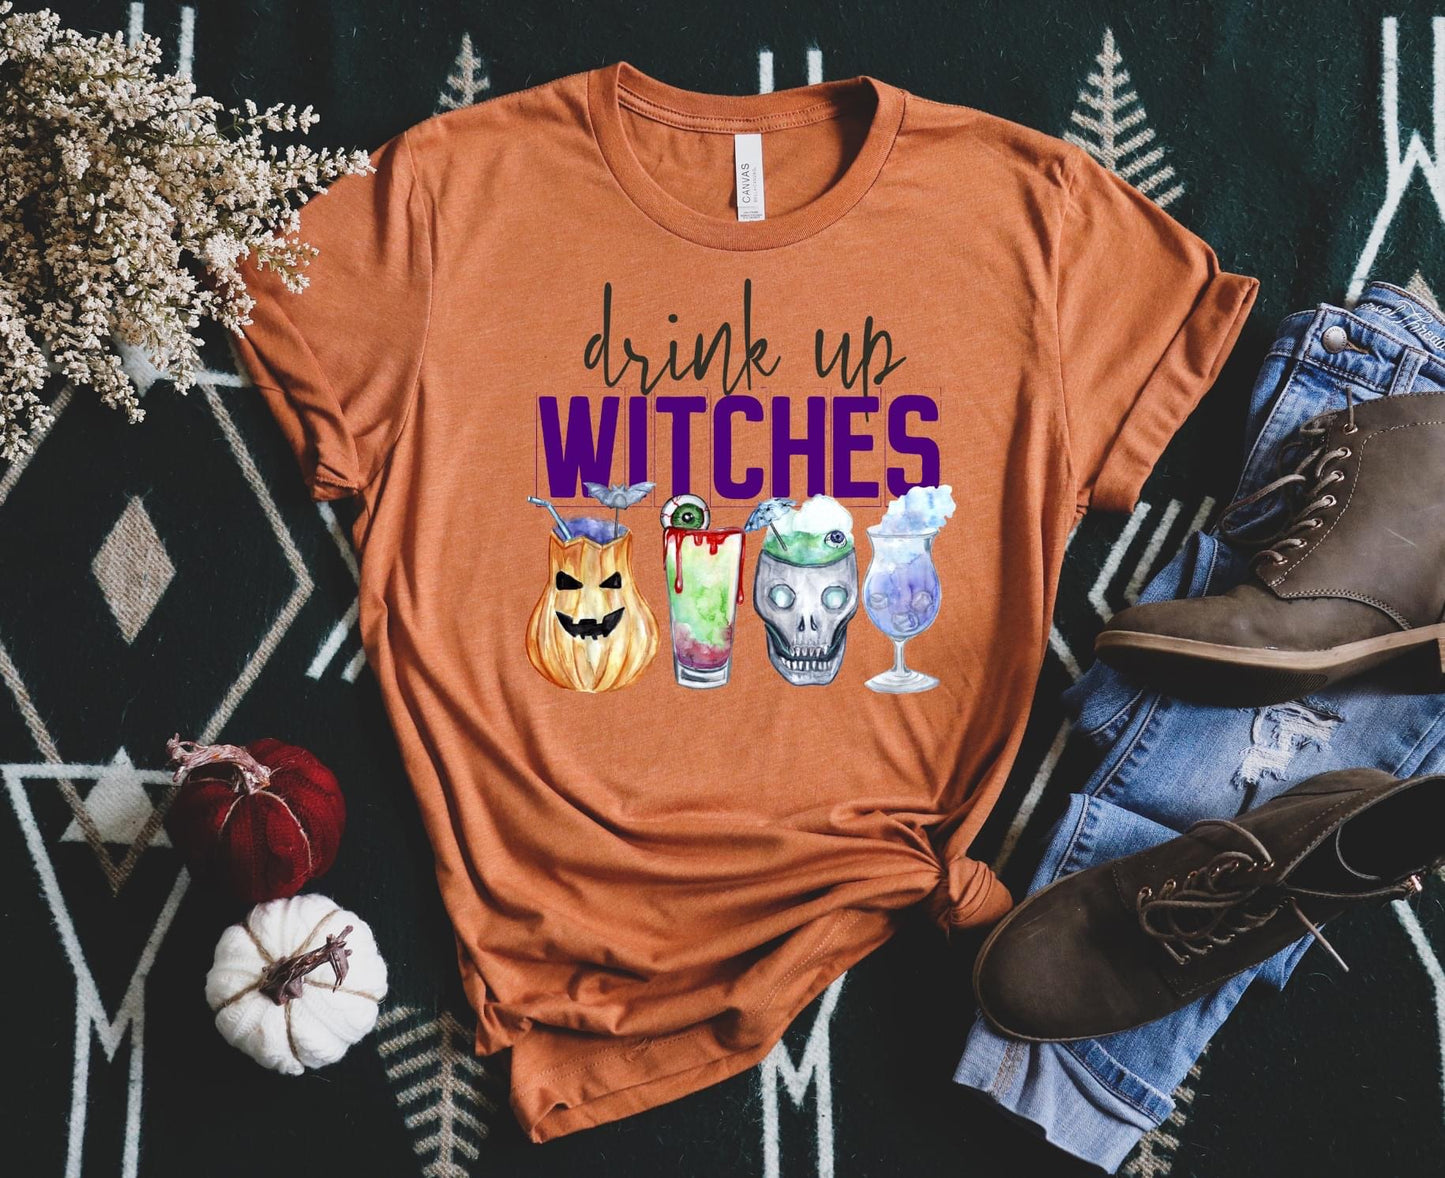 PREORDER - Drink Up Witches Soft Boutique Tee